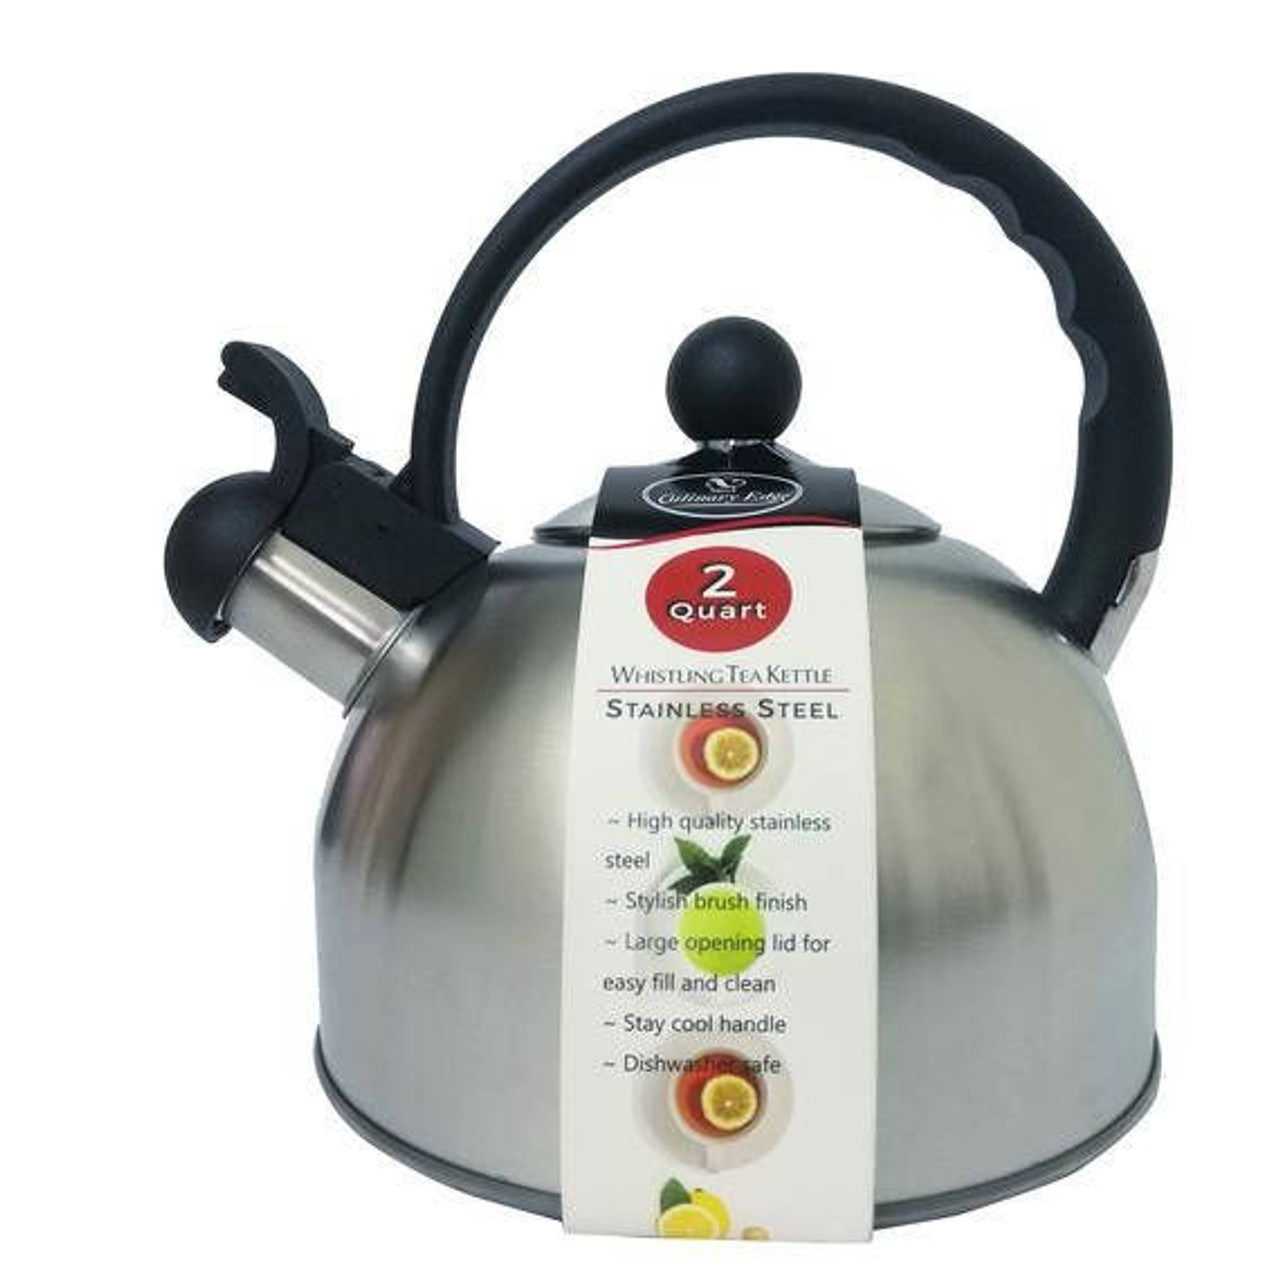 https://cdn11.bigcommerce.com/s-q0oajb576s/images/stencil/1280x1280/products/1315/3619/2-qt-whistling-tea-kettles-with-lids-polished-stainless-steel-w-stay-cool-handles-11__28056.1637184335.jpg?c=1